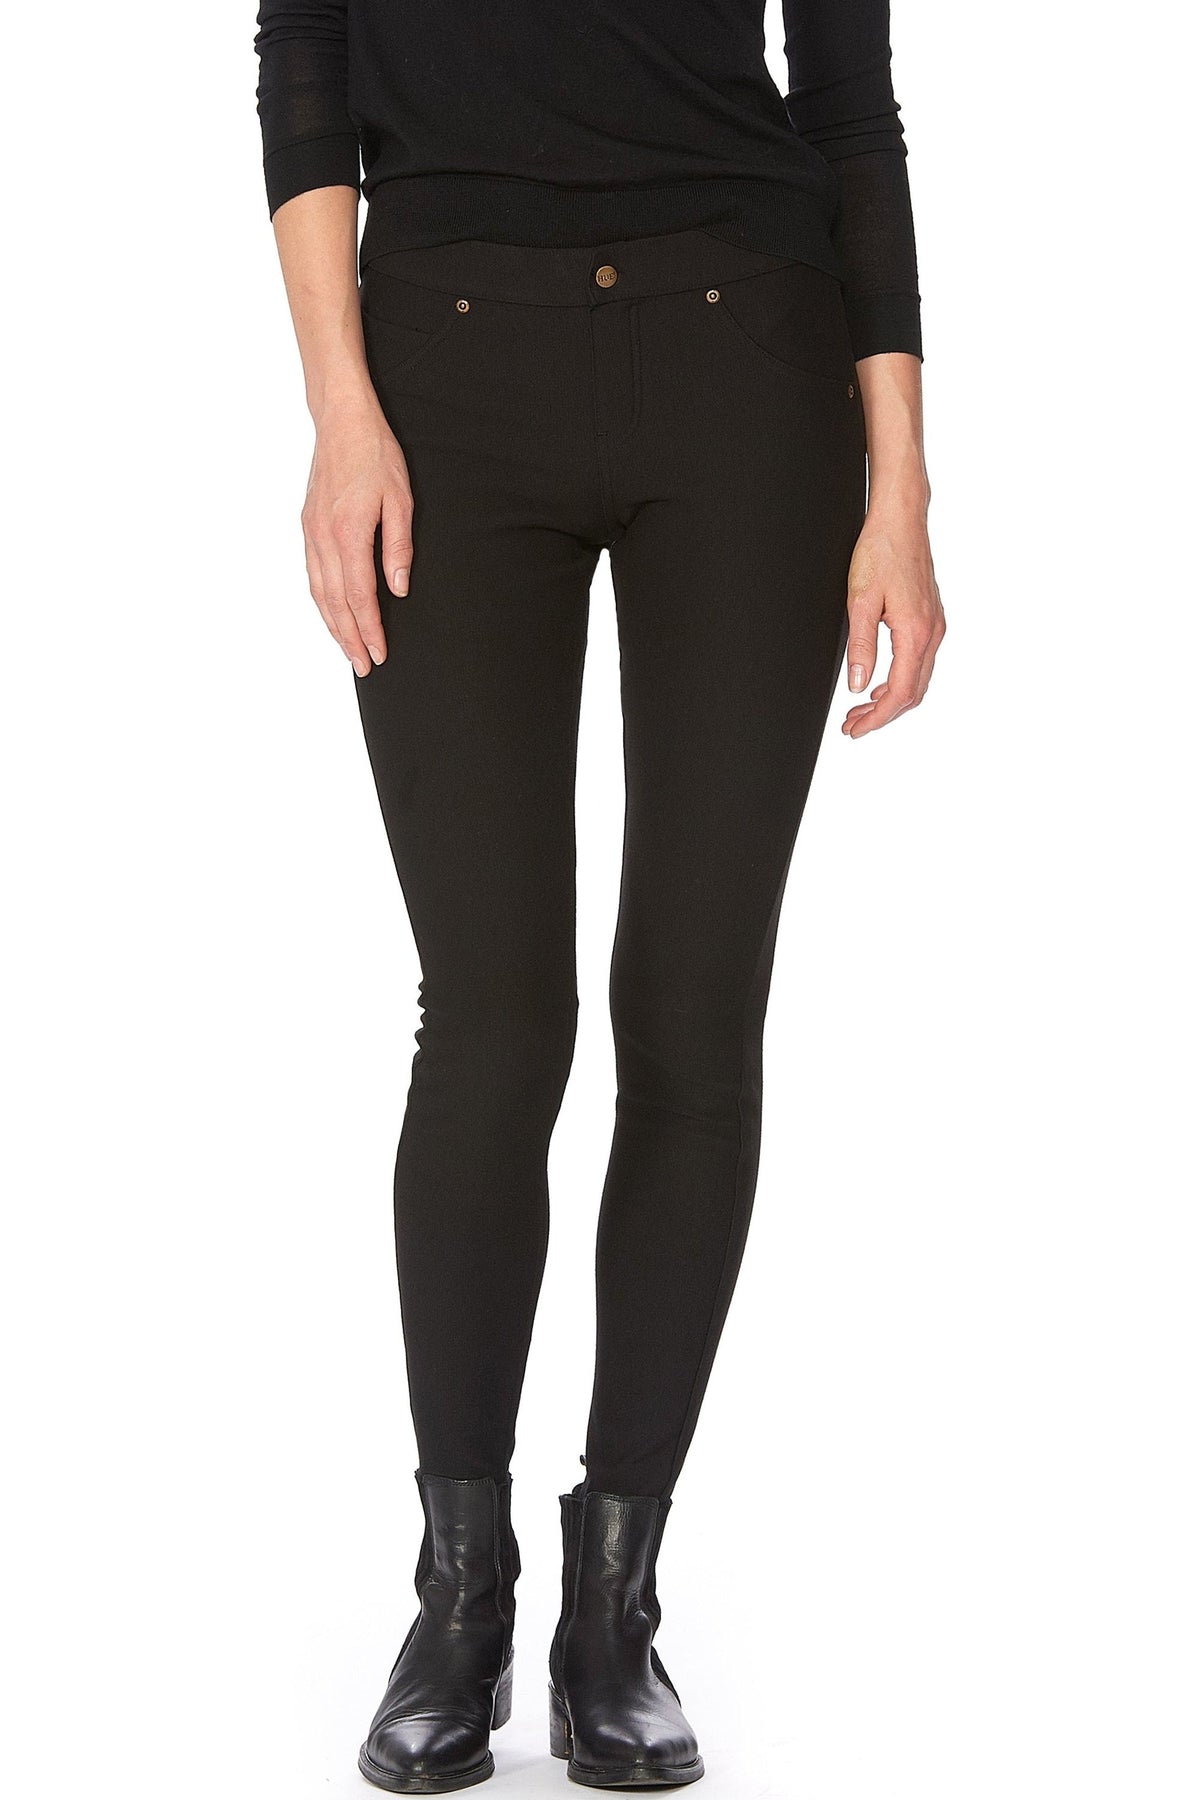 HUE Hue Women's Ultra Legging with Wide Waistband - X-Large - Espresso